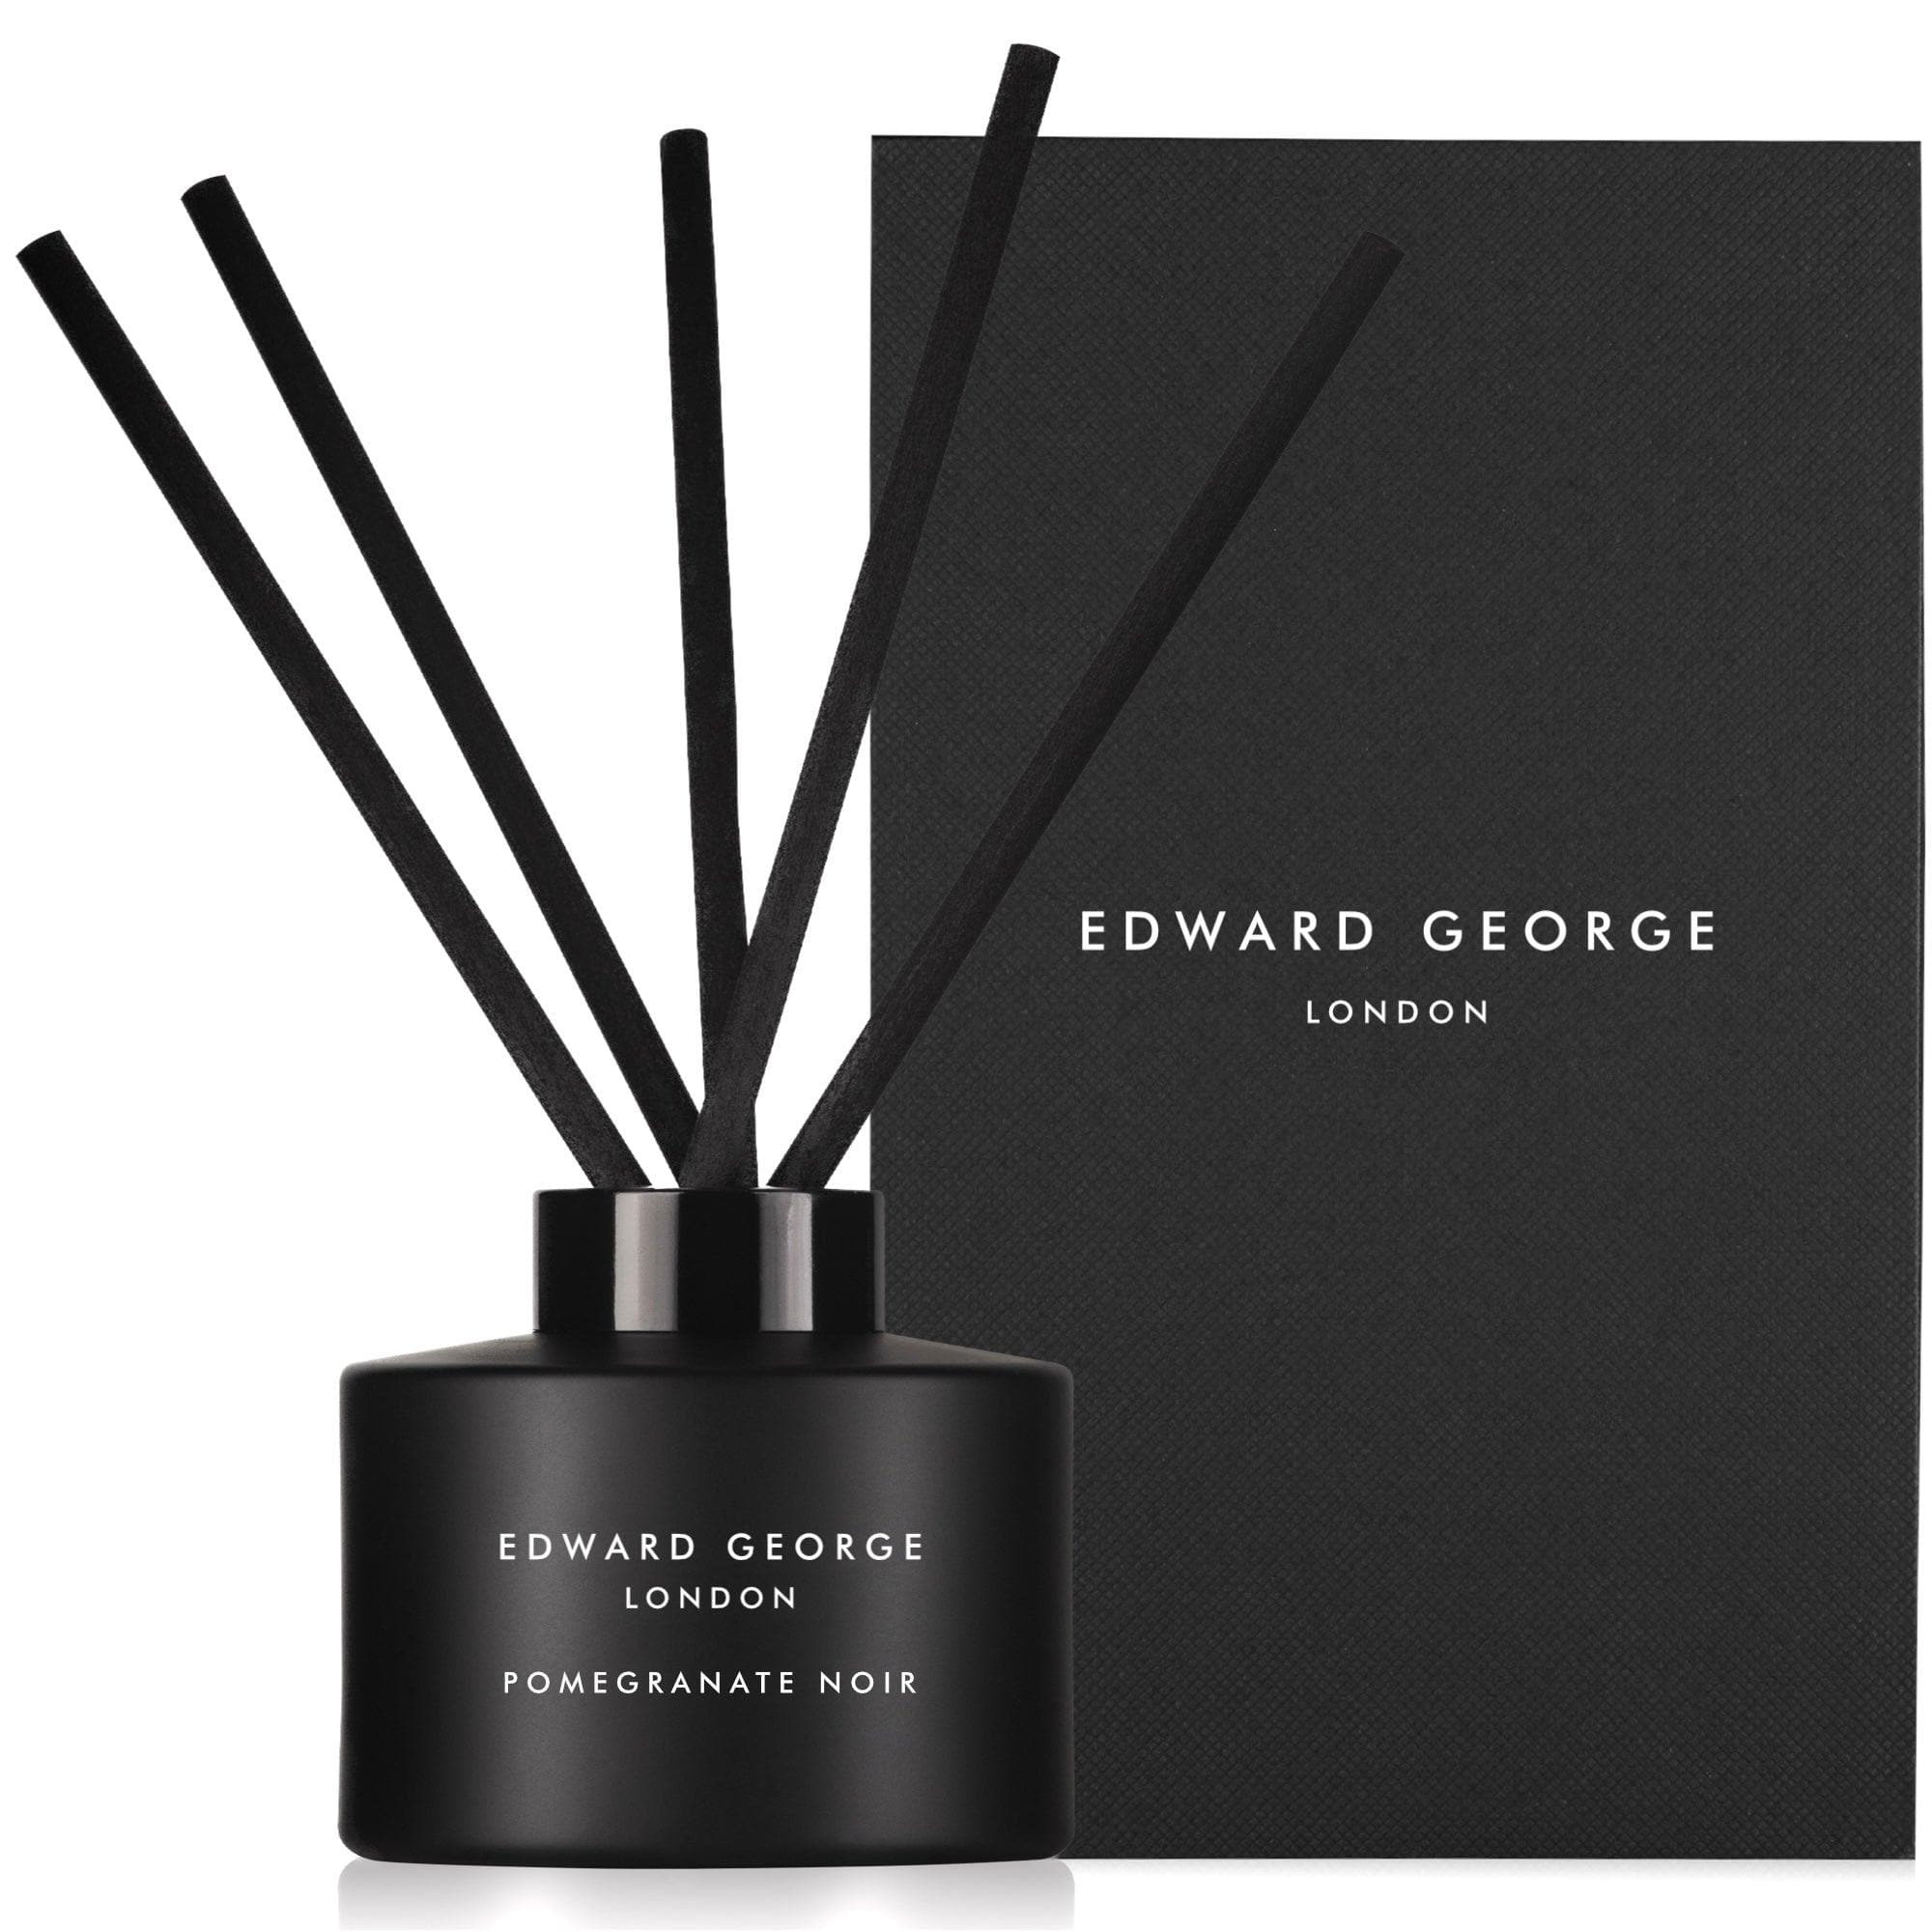 pomegranate noir reed diffusers refills home fragrance decor room edward george london infographic luxury gift ritual scented england sticks scent oil diffuser refill women men black